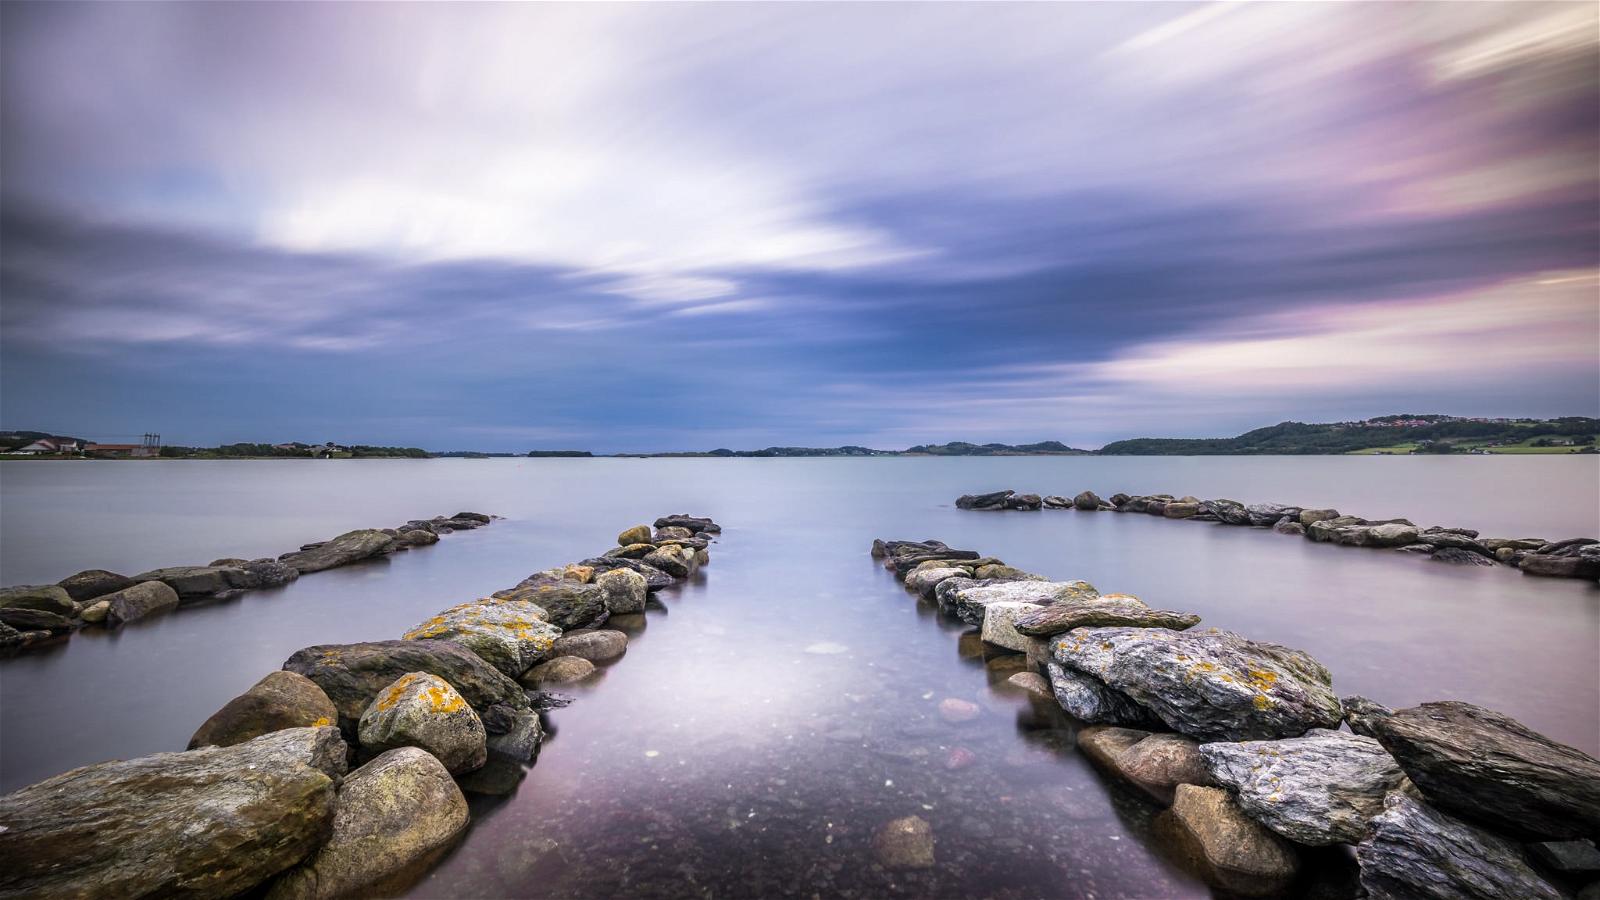 Imagen de Hafrsfjord. longexposure travel sunset sea sky seascape motion water weather norway clouds reflections landscape geotagged photography stavanger photo hafrsfjord rocks europe no sony fjord fullframe onsale ultrawide a7 rogaland bythesea sonya7 sonyfe1635